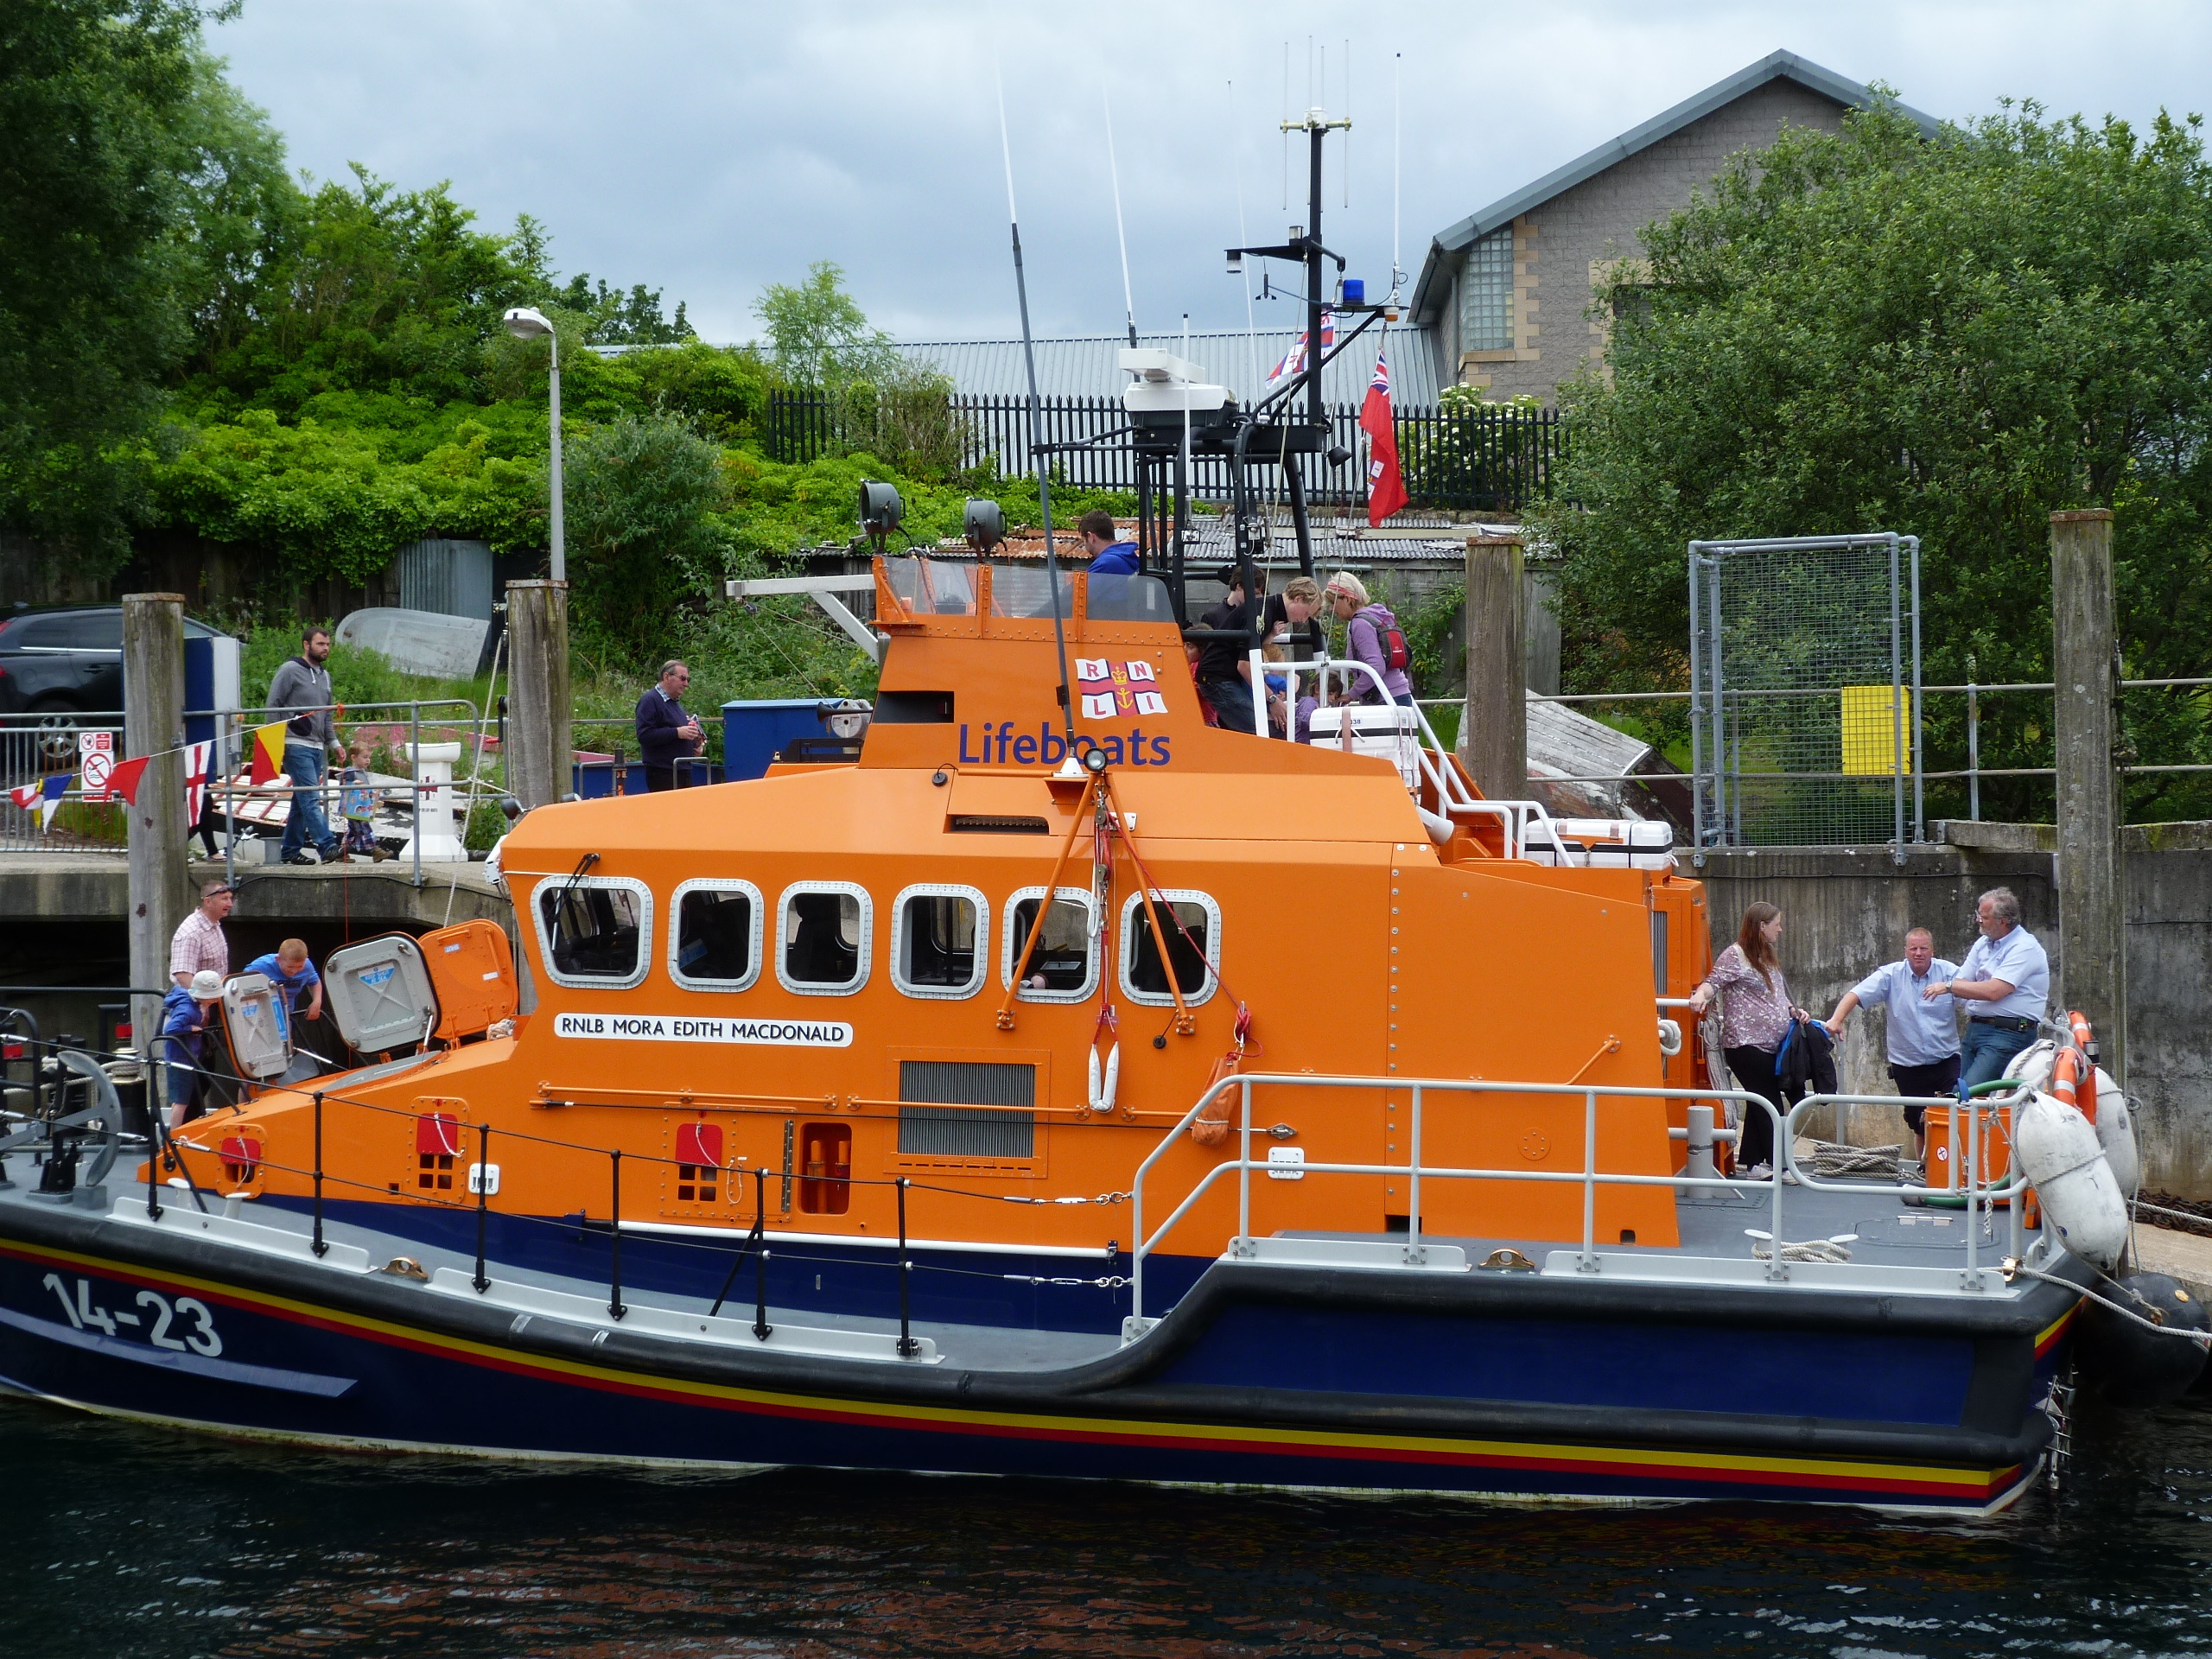 Oban lifeboat was launched to help the stricken boat